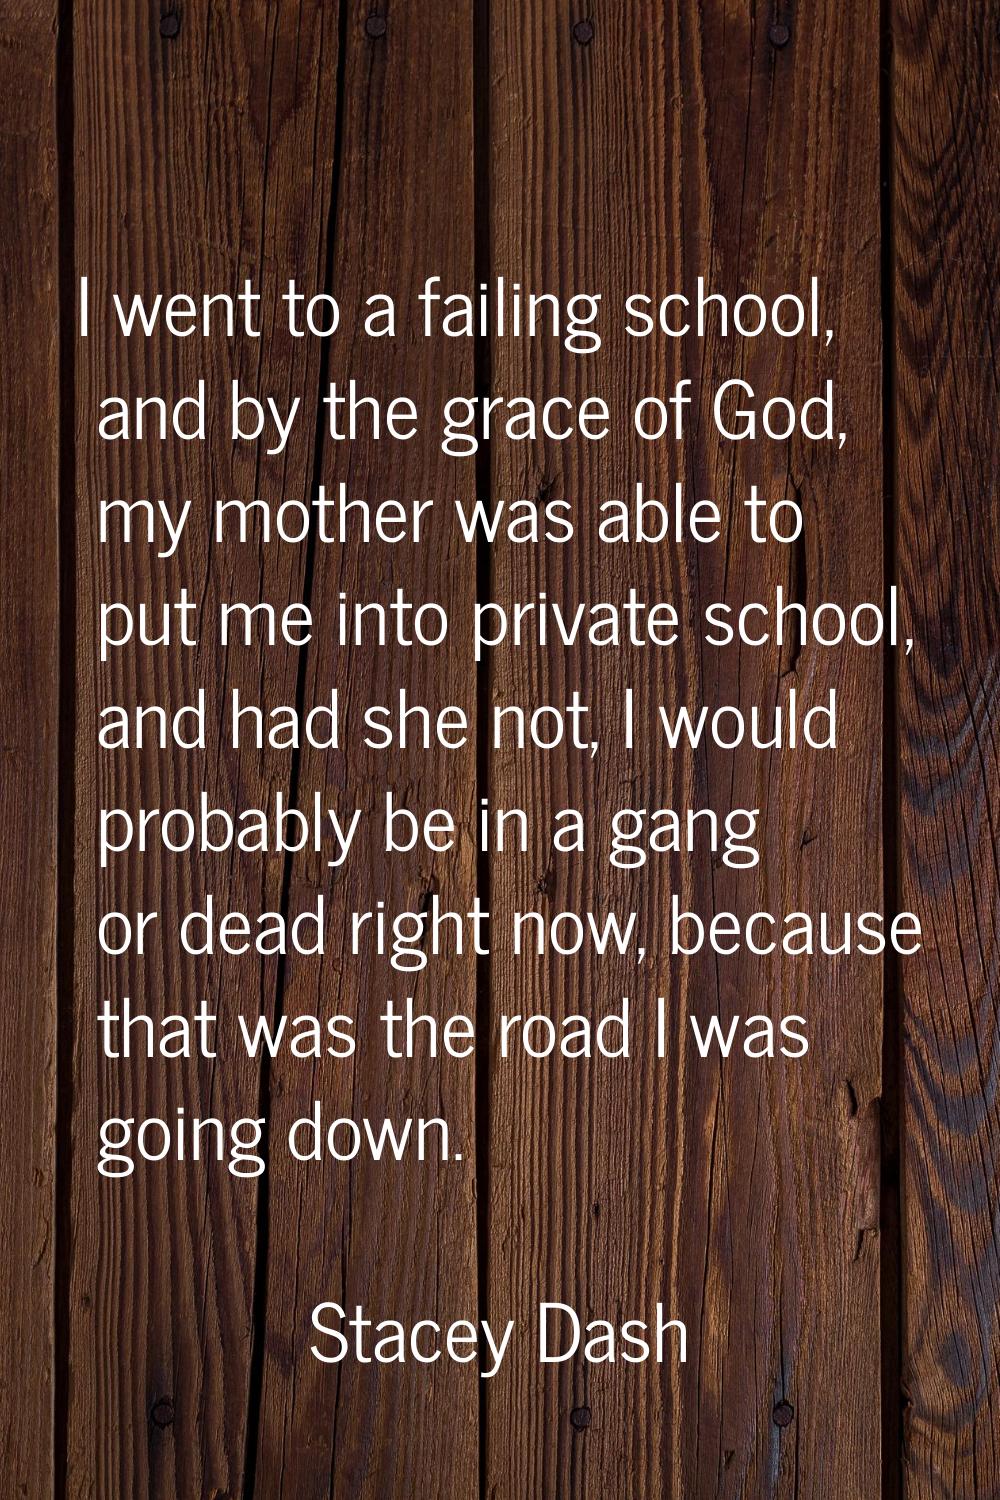 I went to a failing school, and by the grace of God, my mother was able to put me into private scho